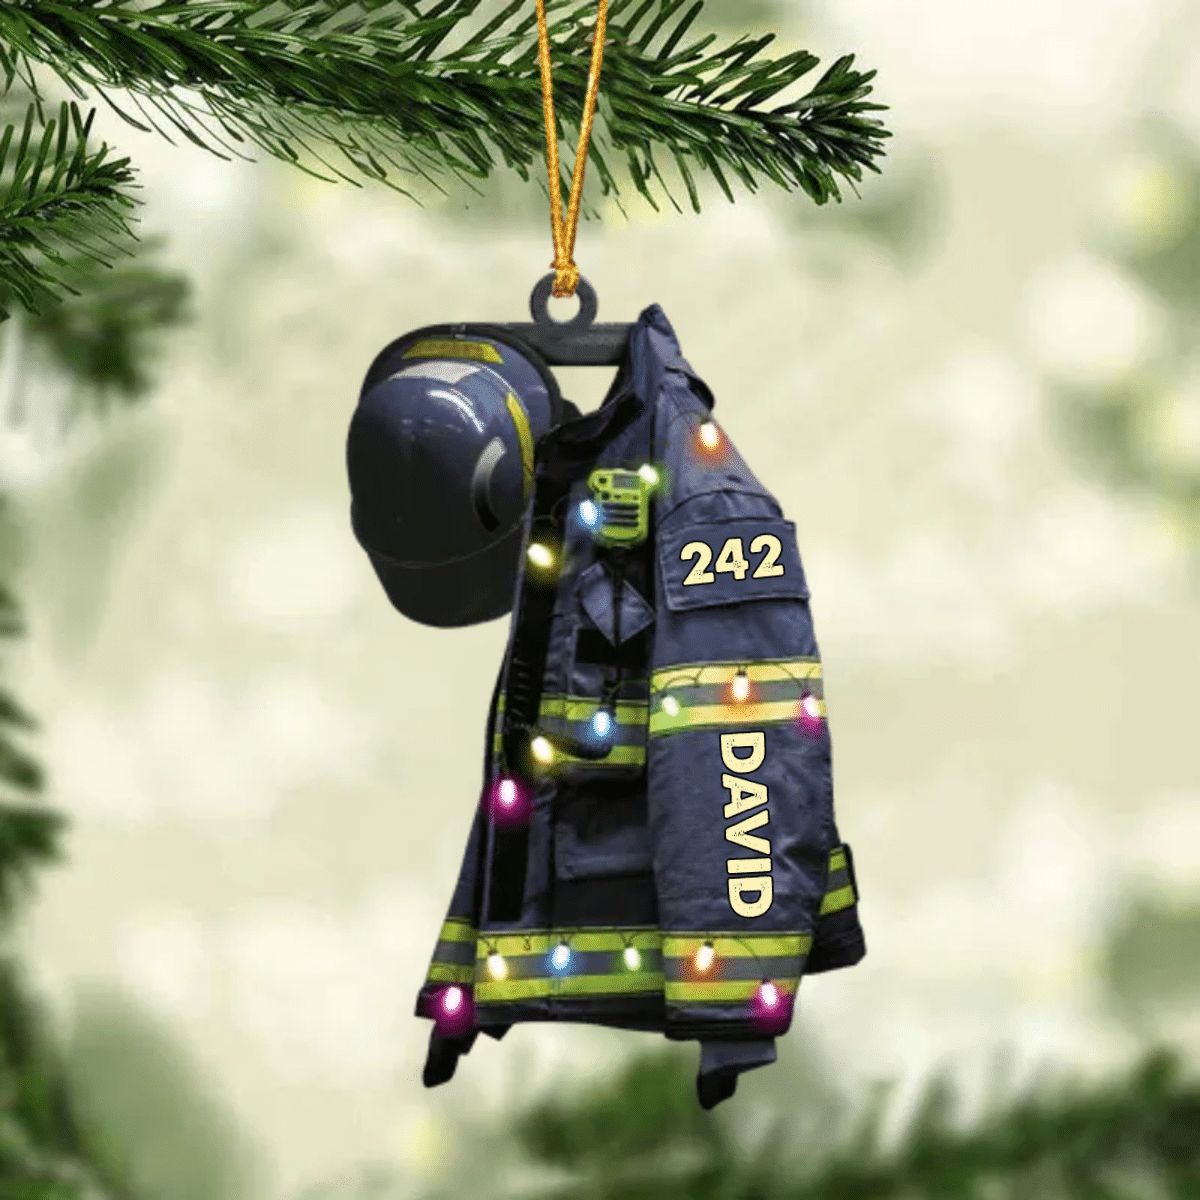 Firefighter Suits With Christmas Light - Personalized Flat Ornament - Gift For Firefighters